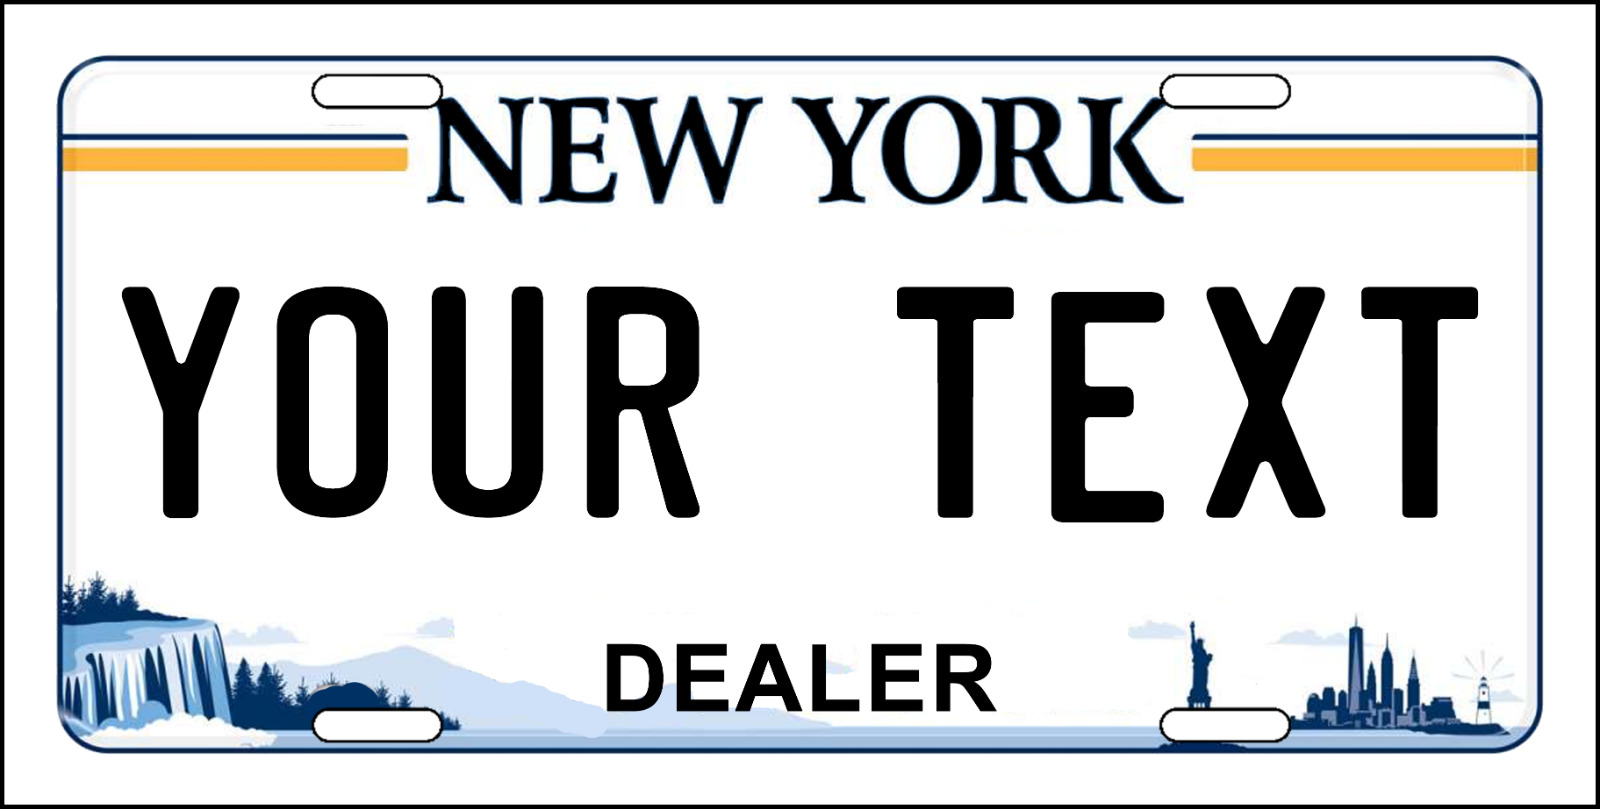 CUSTOMIZE THIS NEW YORK LICENSE PLATE - ANY TEXT YOU WANT, novelty Dealer plates